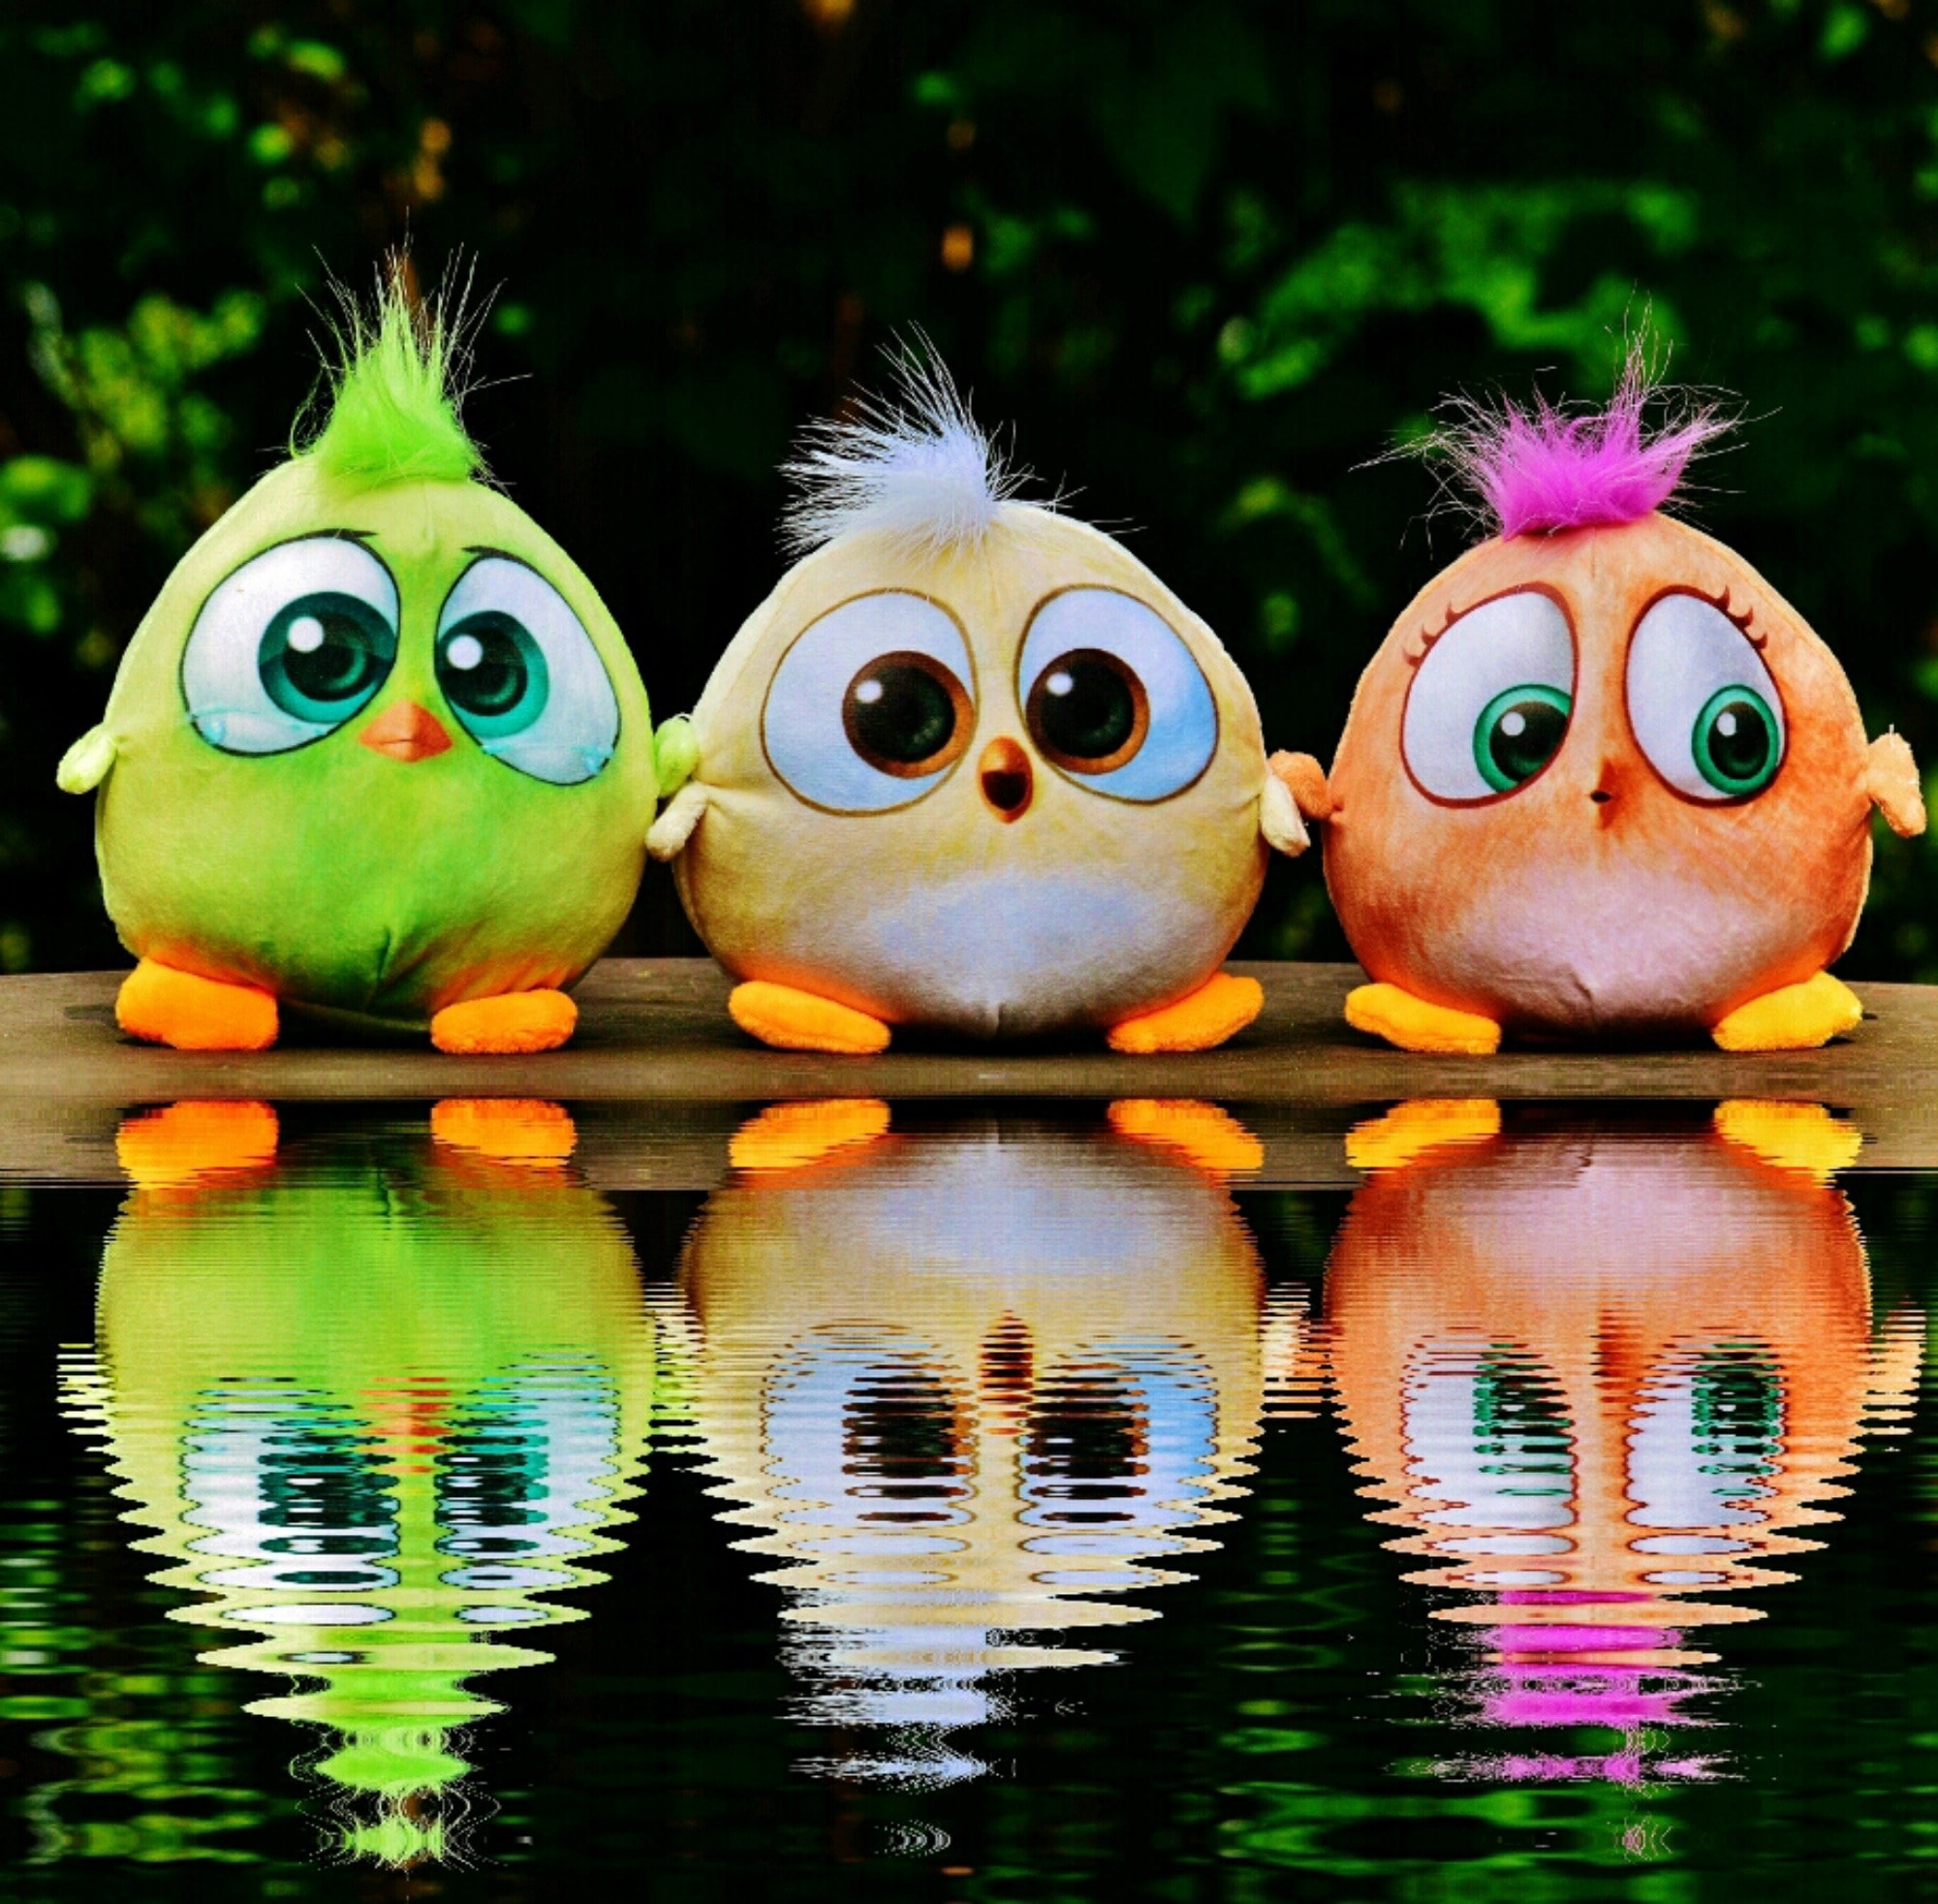 3 baby birds from angry birds movie